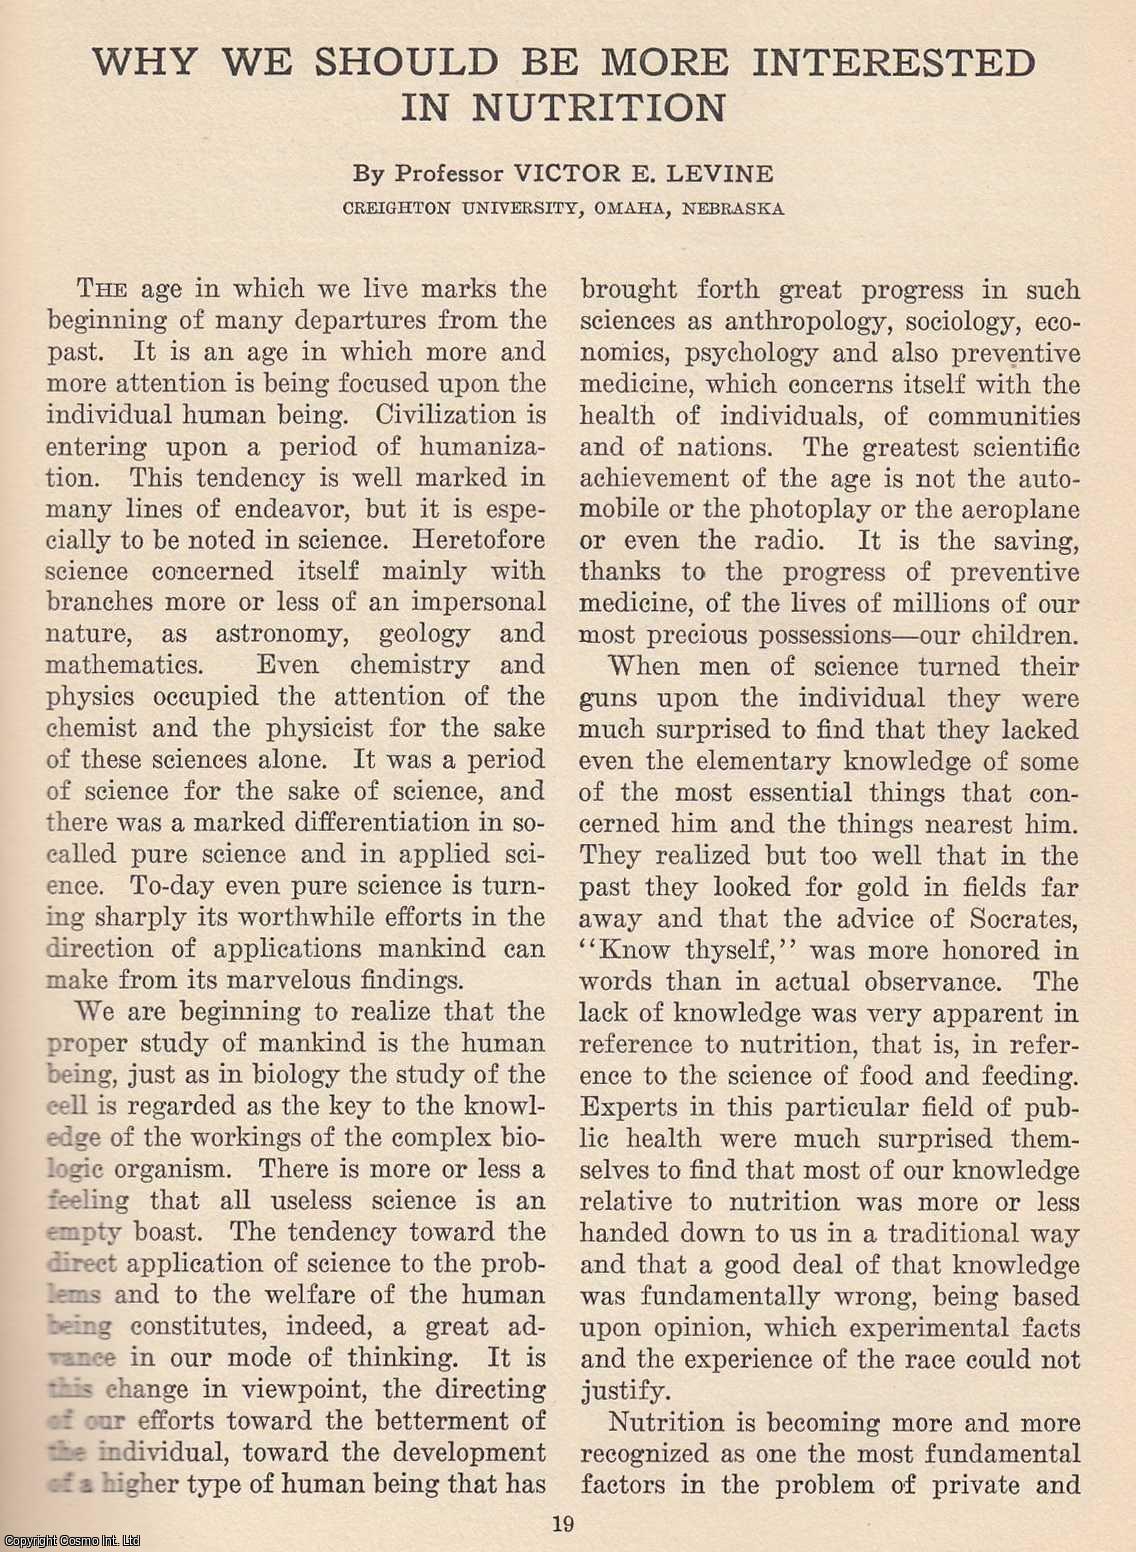 Professor Victor E. Levine - Why we should be more Interested in Nutrition. An original article from The Scientific Monthly, 1926.